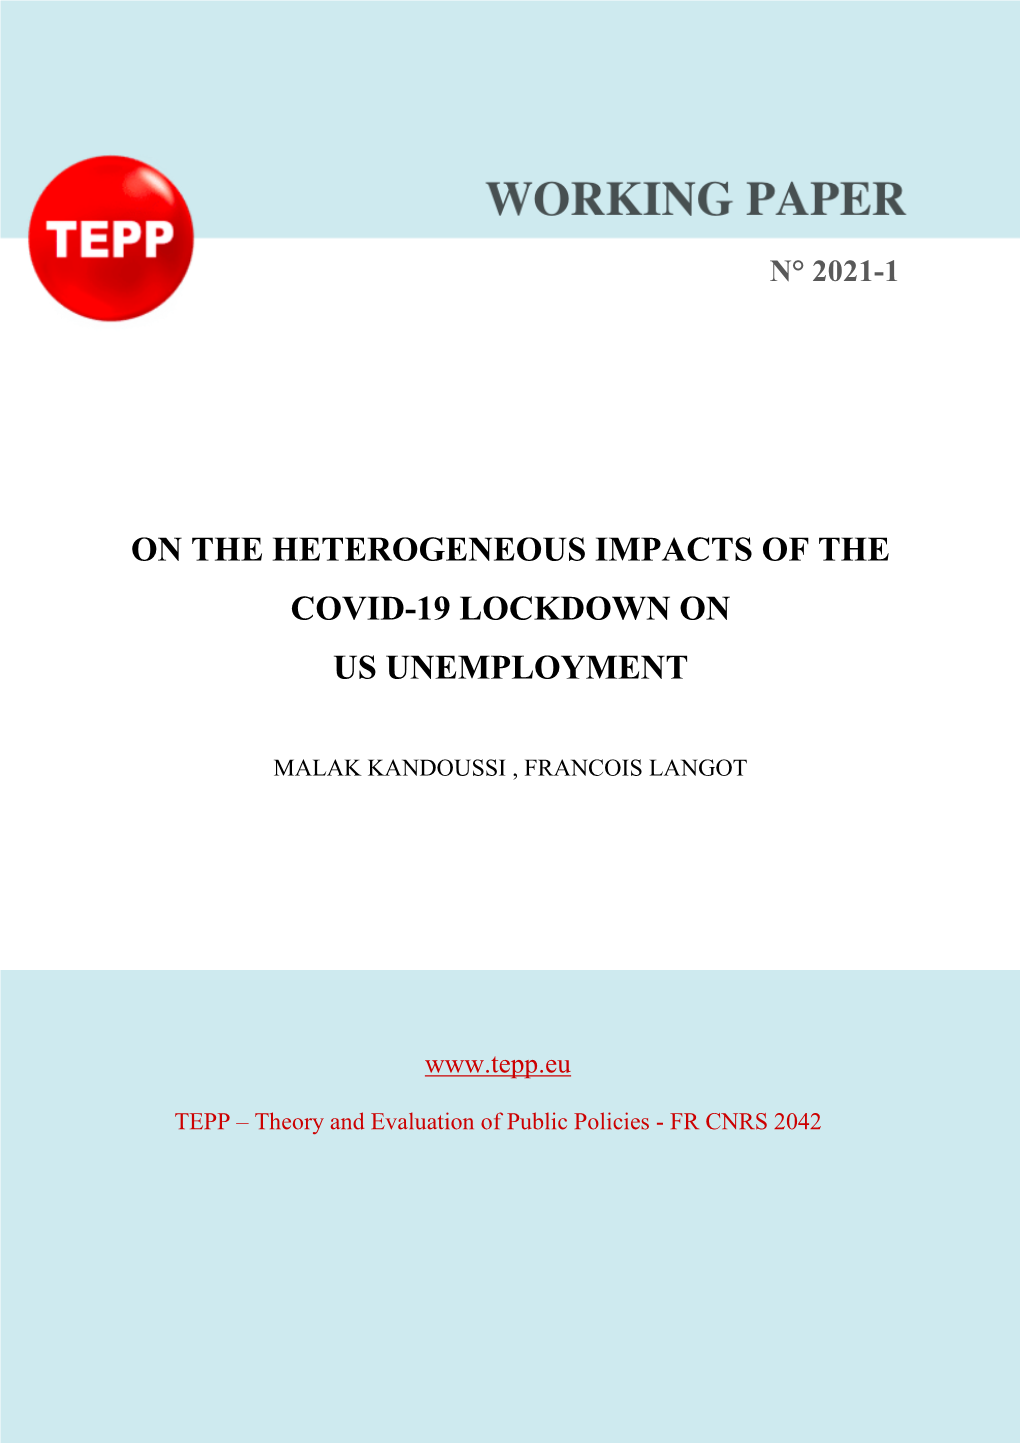 On the Heterogeneous Impacts of the Covid-19 Lockdown on Us Unemployment